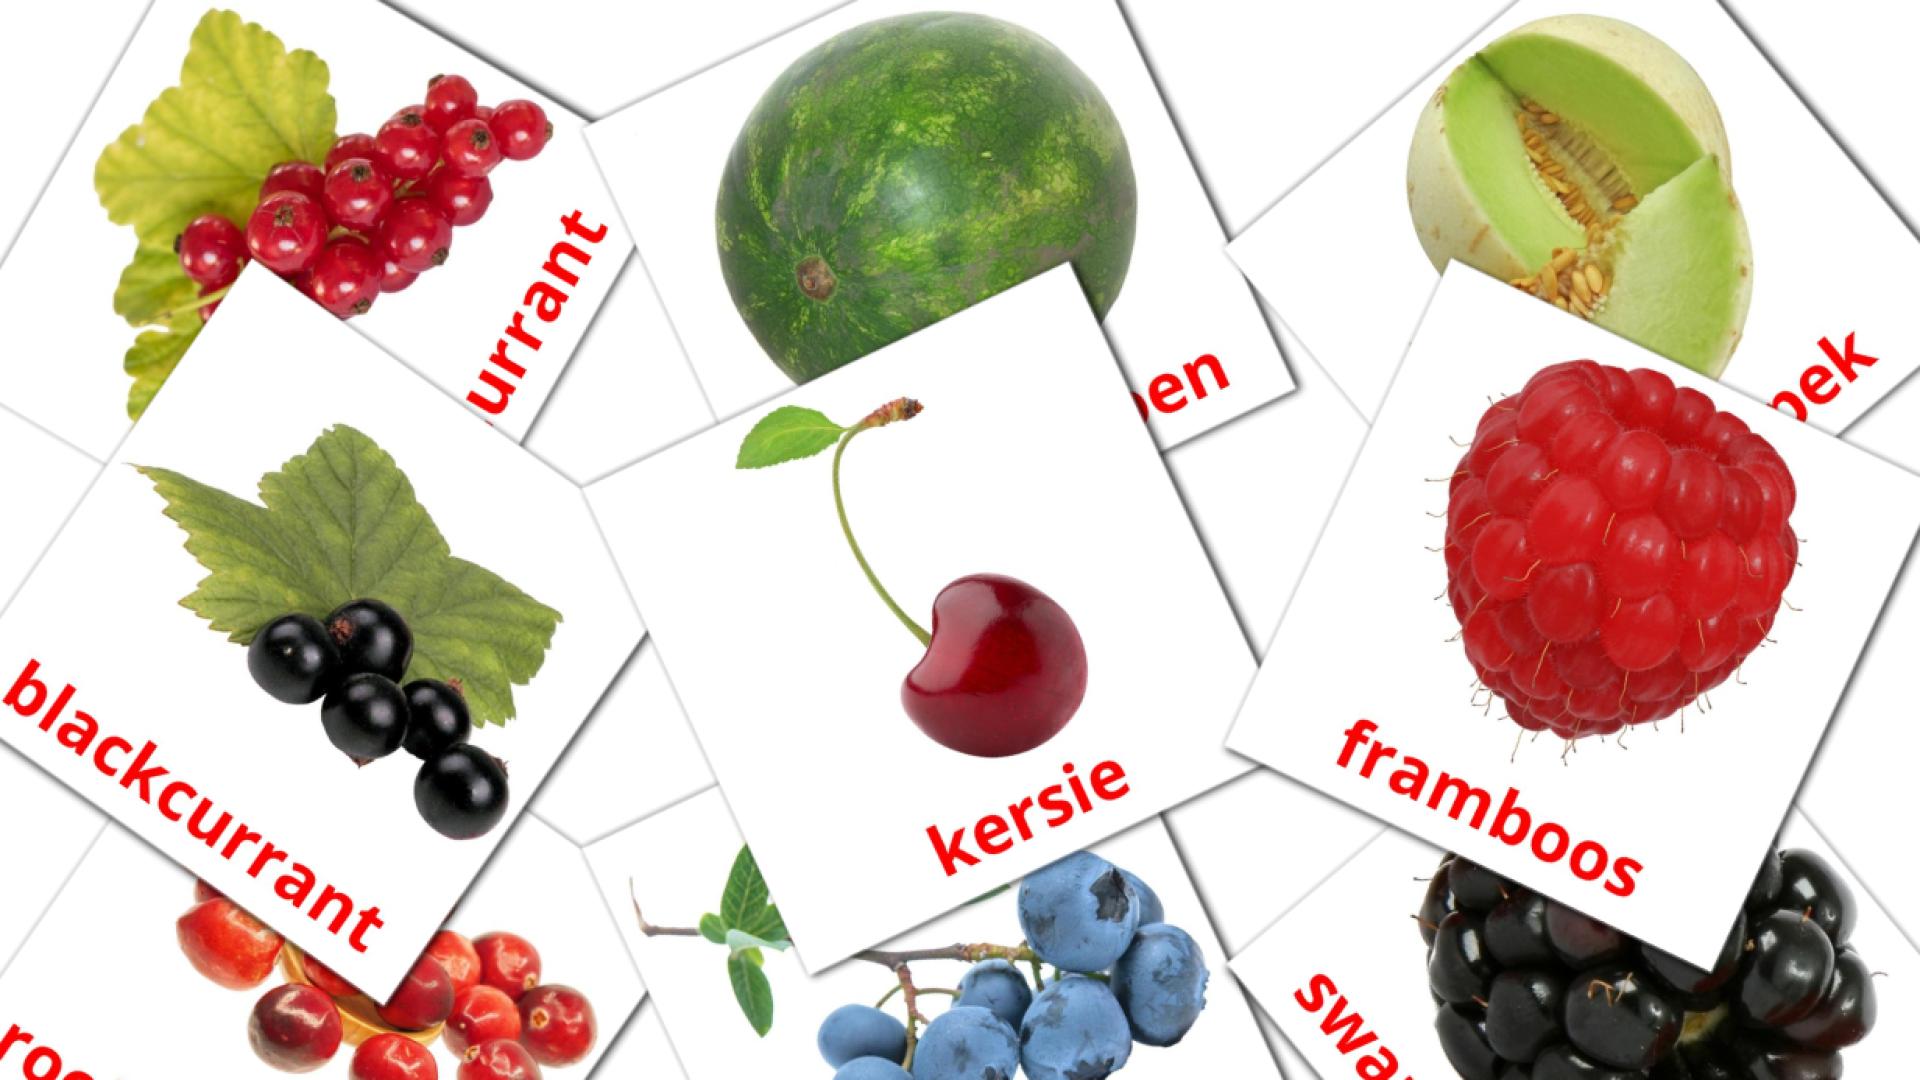 Berries - afrikaans vocabulary cards